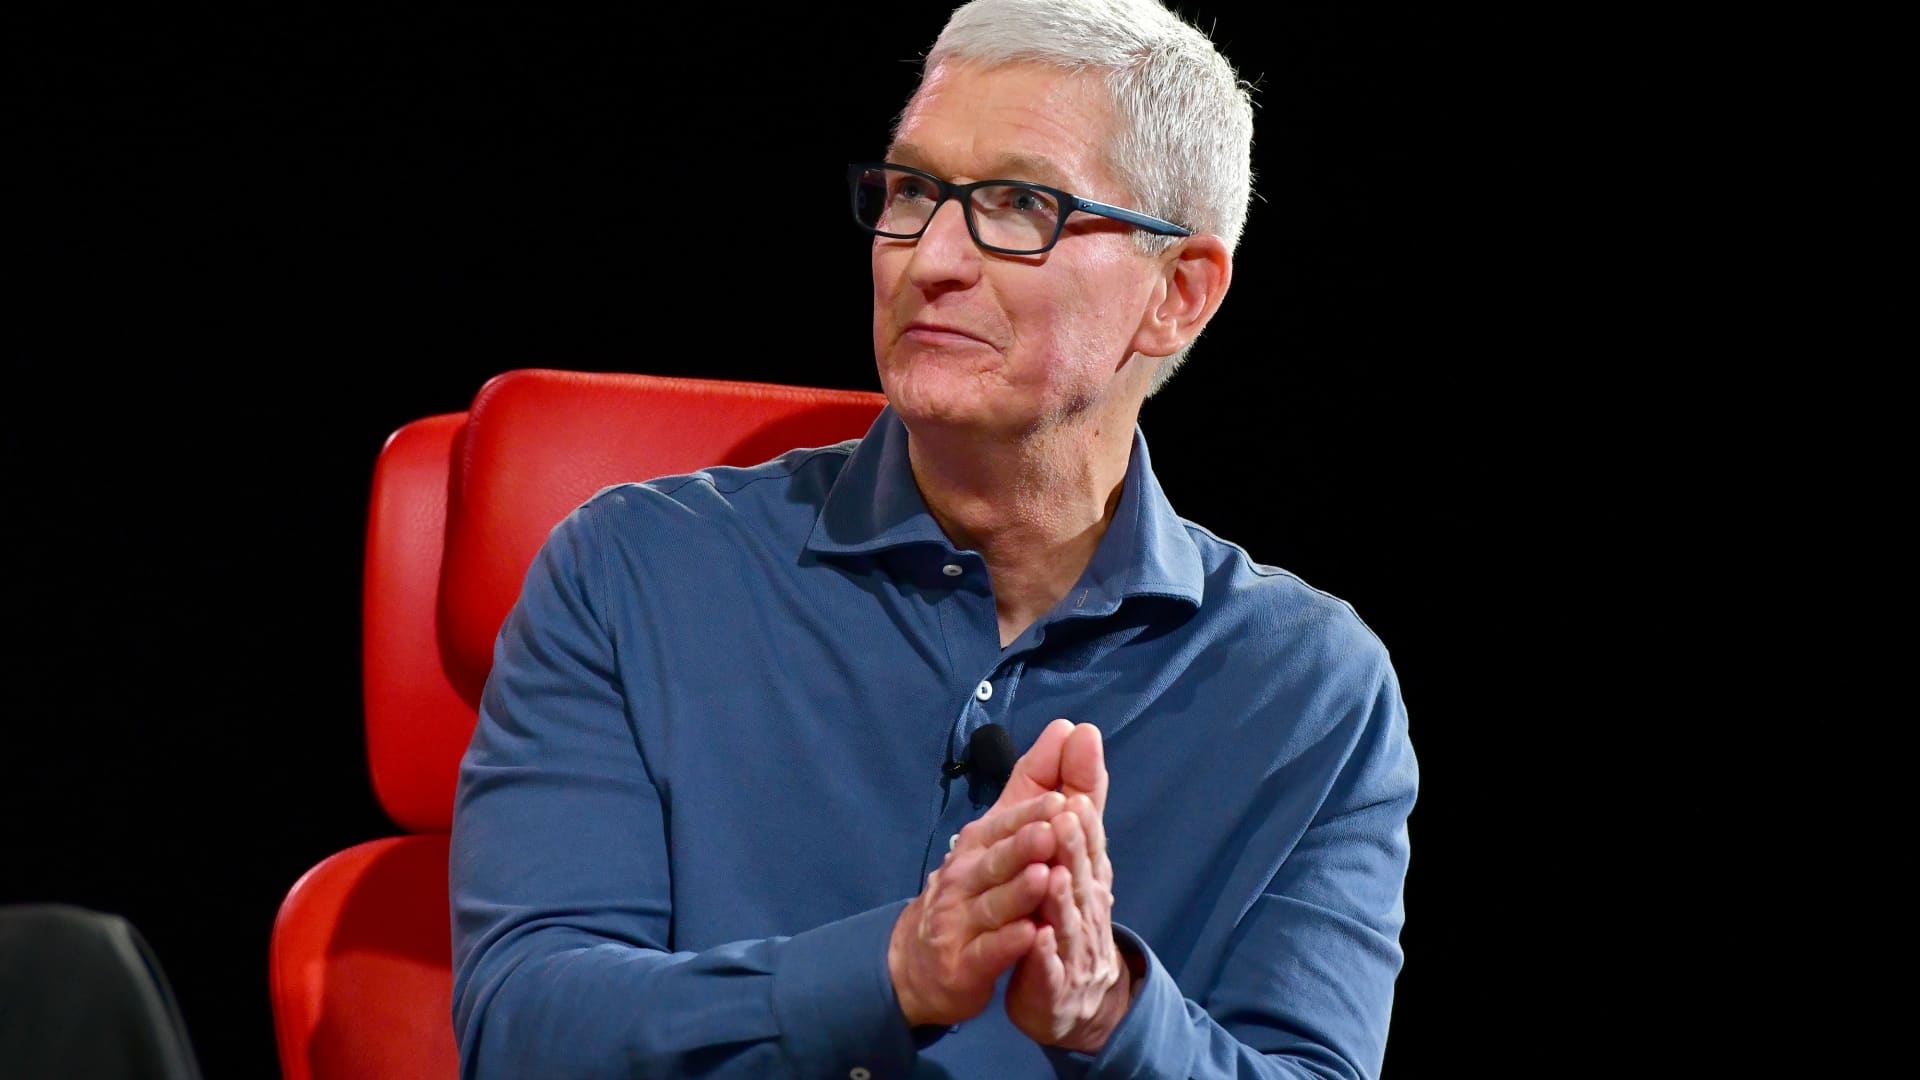 ‘Buy your mom an iPhone’: Texting experience with Android phones is a low priority for Apple, Tim Cook says